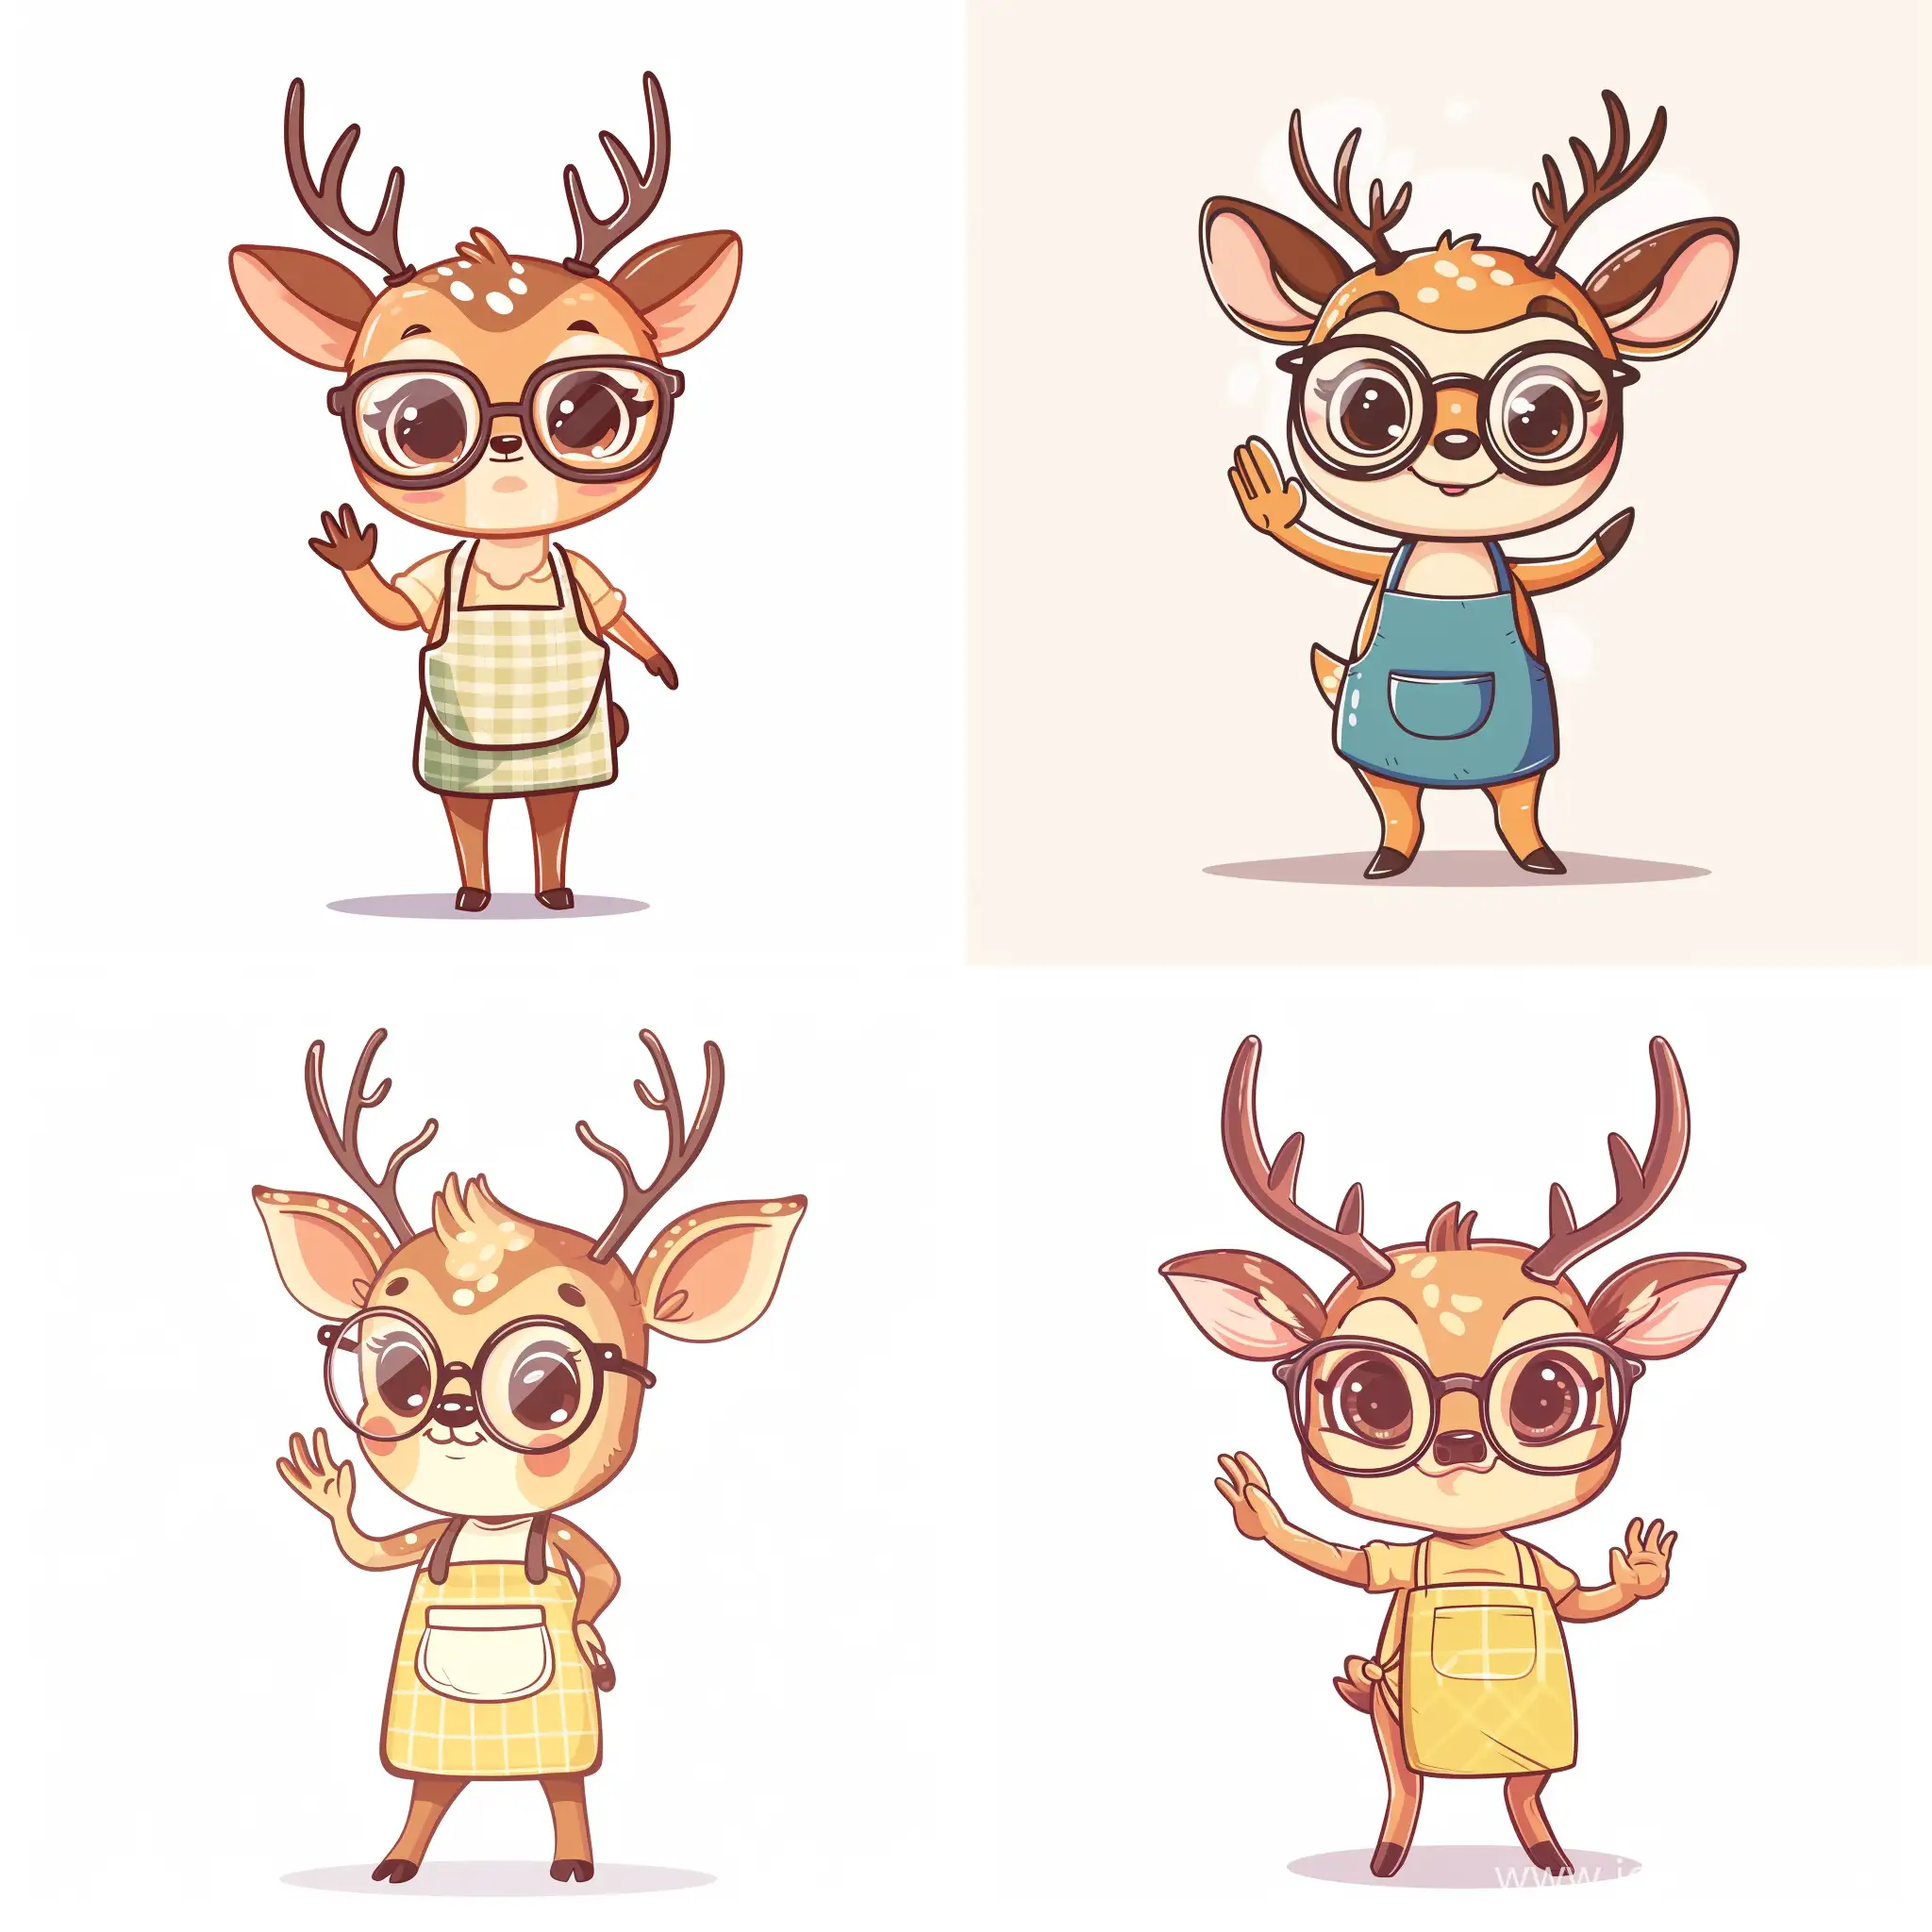 Adorable-Anthropomorphic-Baby-Deer-Waving-in-Stylish-Apron-and-Glasses